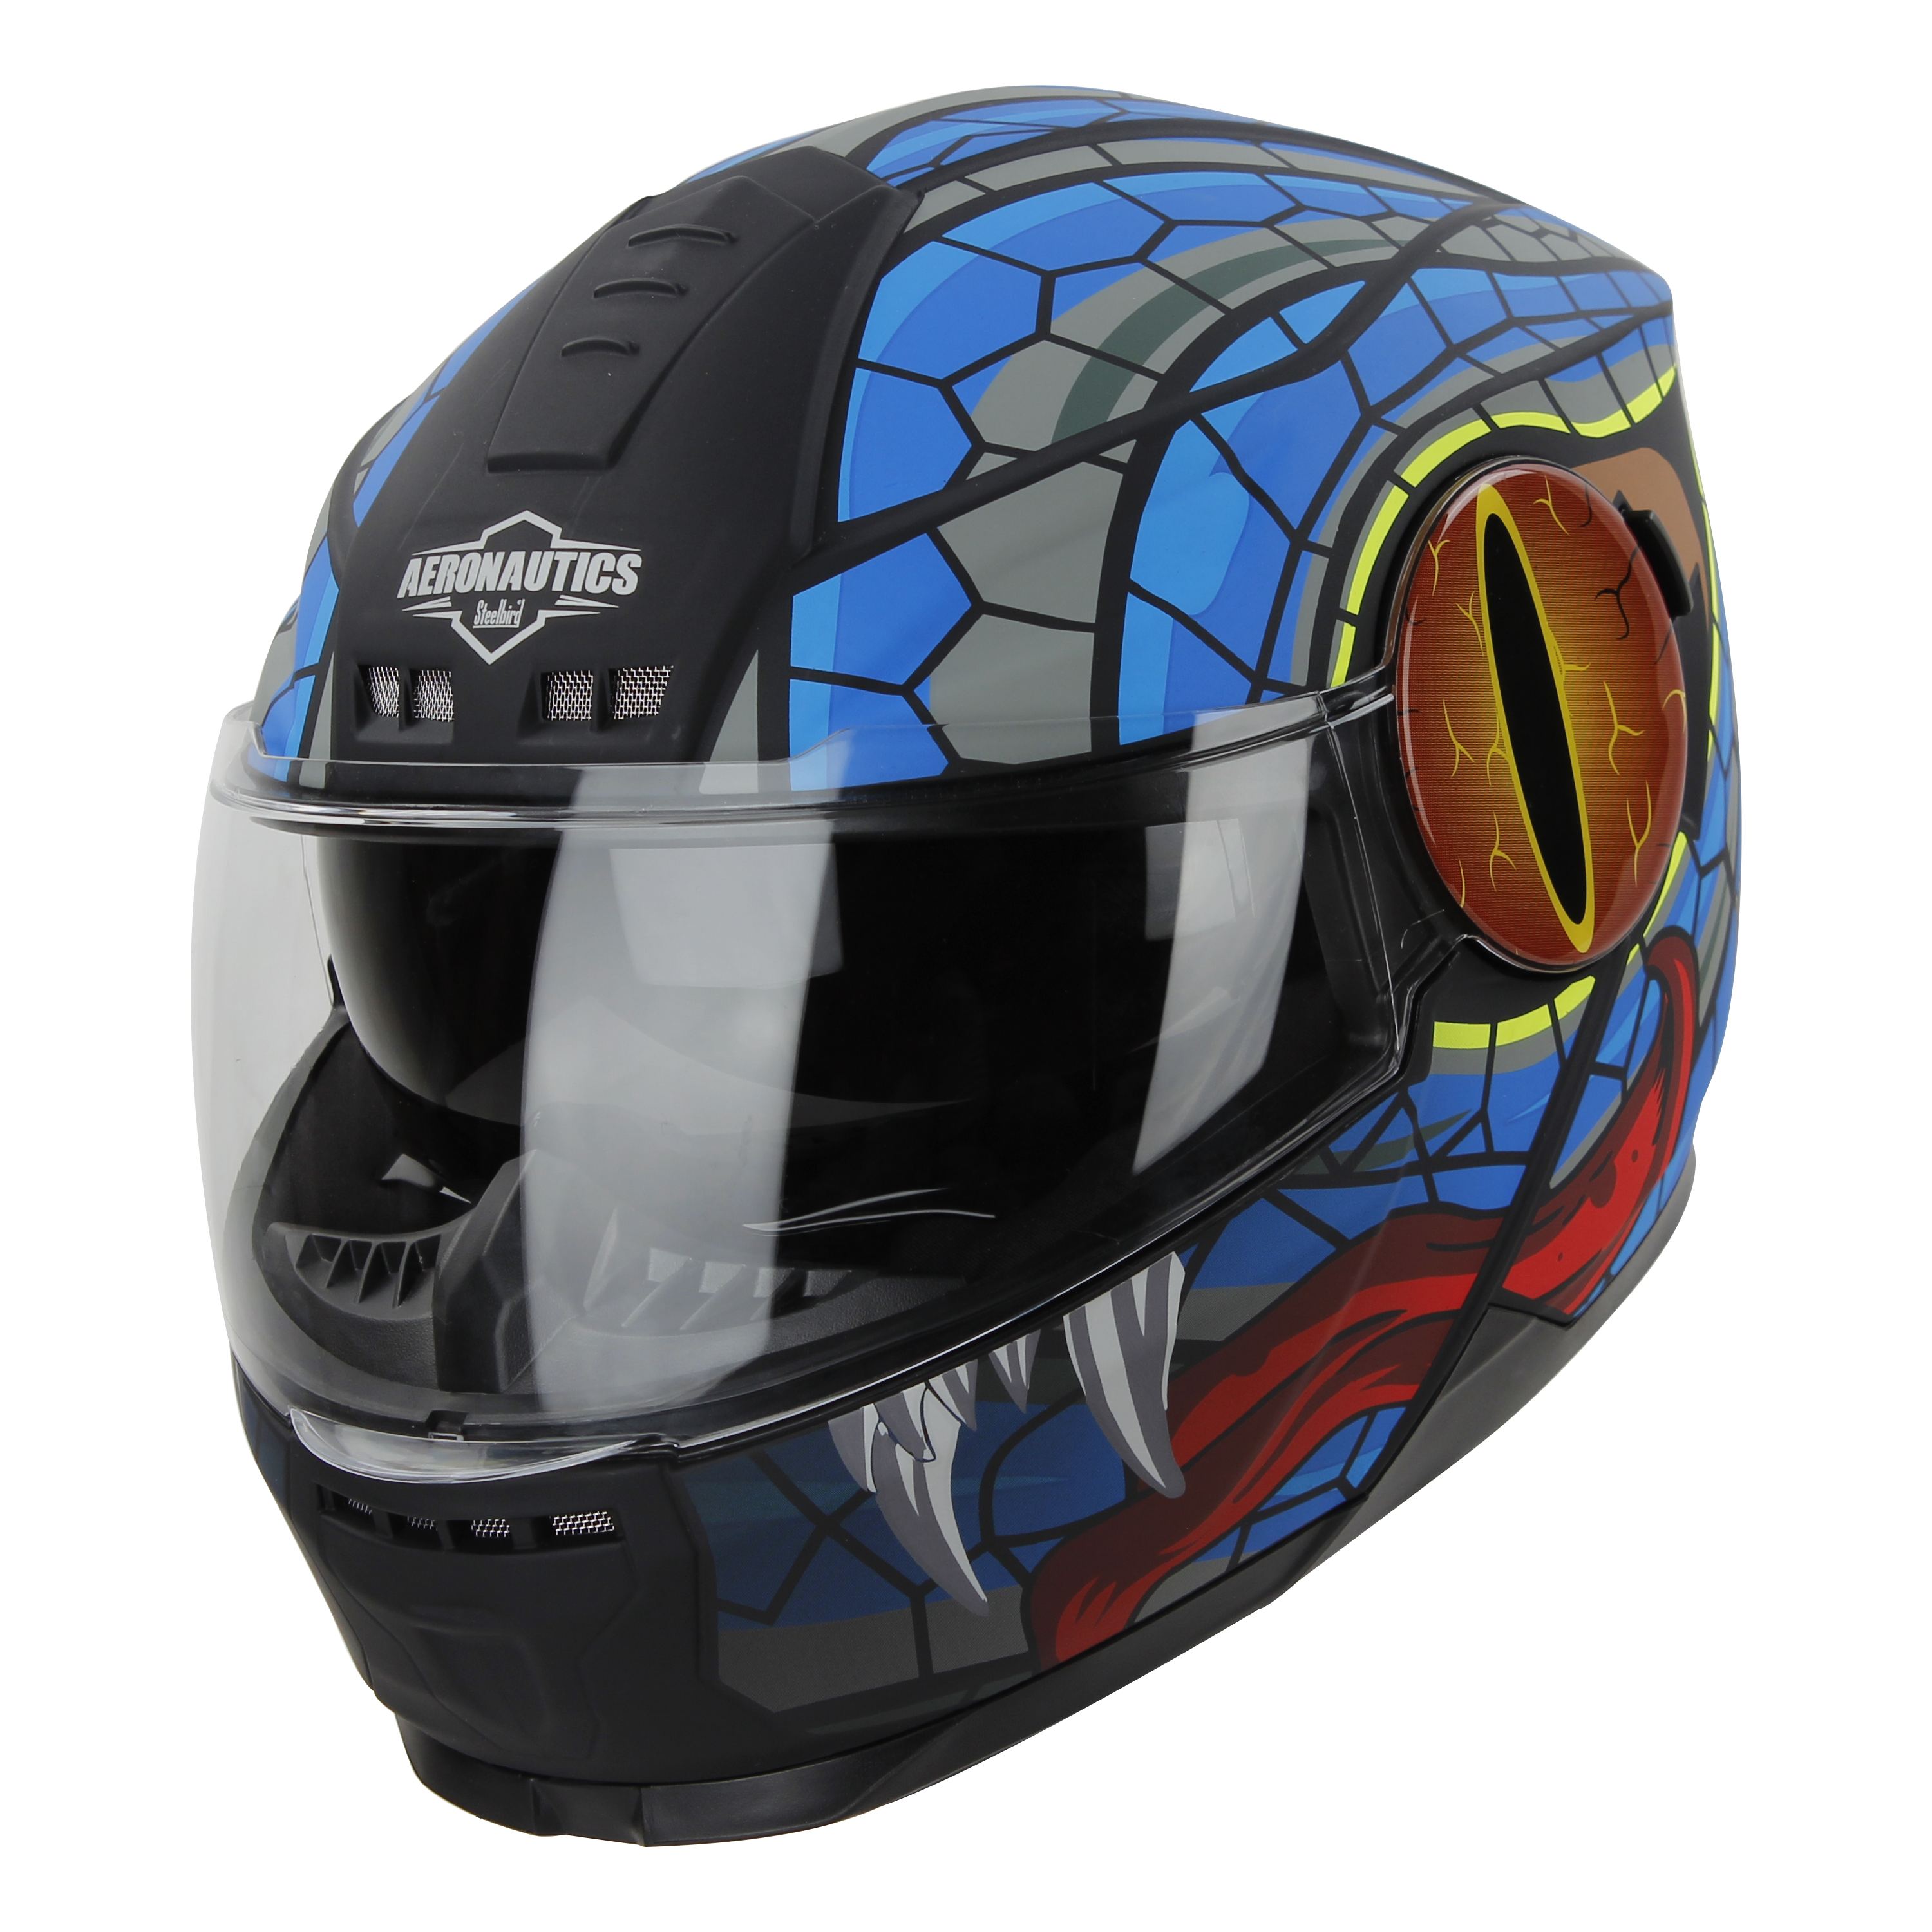 SBH-40 MAMBA GLOSSY BLACK WITH BLUE (INNER SUN SHIELD AND HIGH-END INTERIOR)